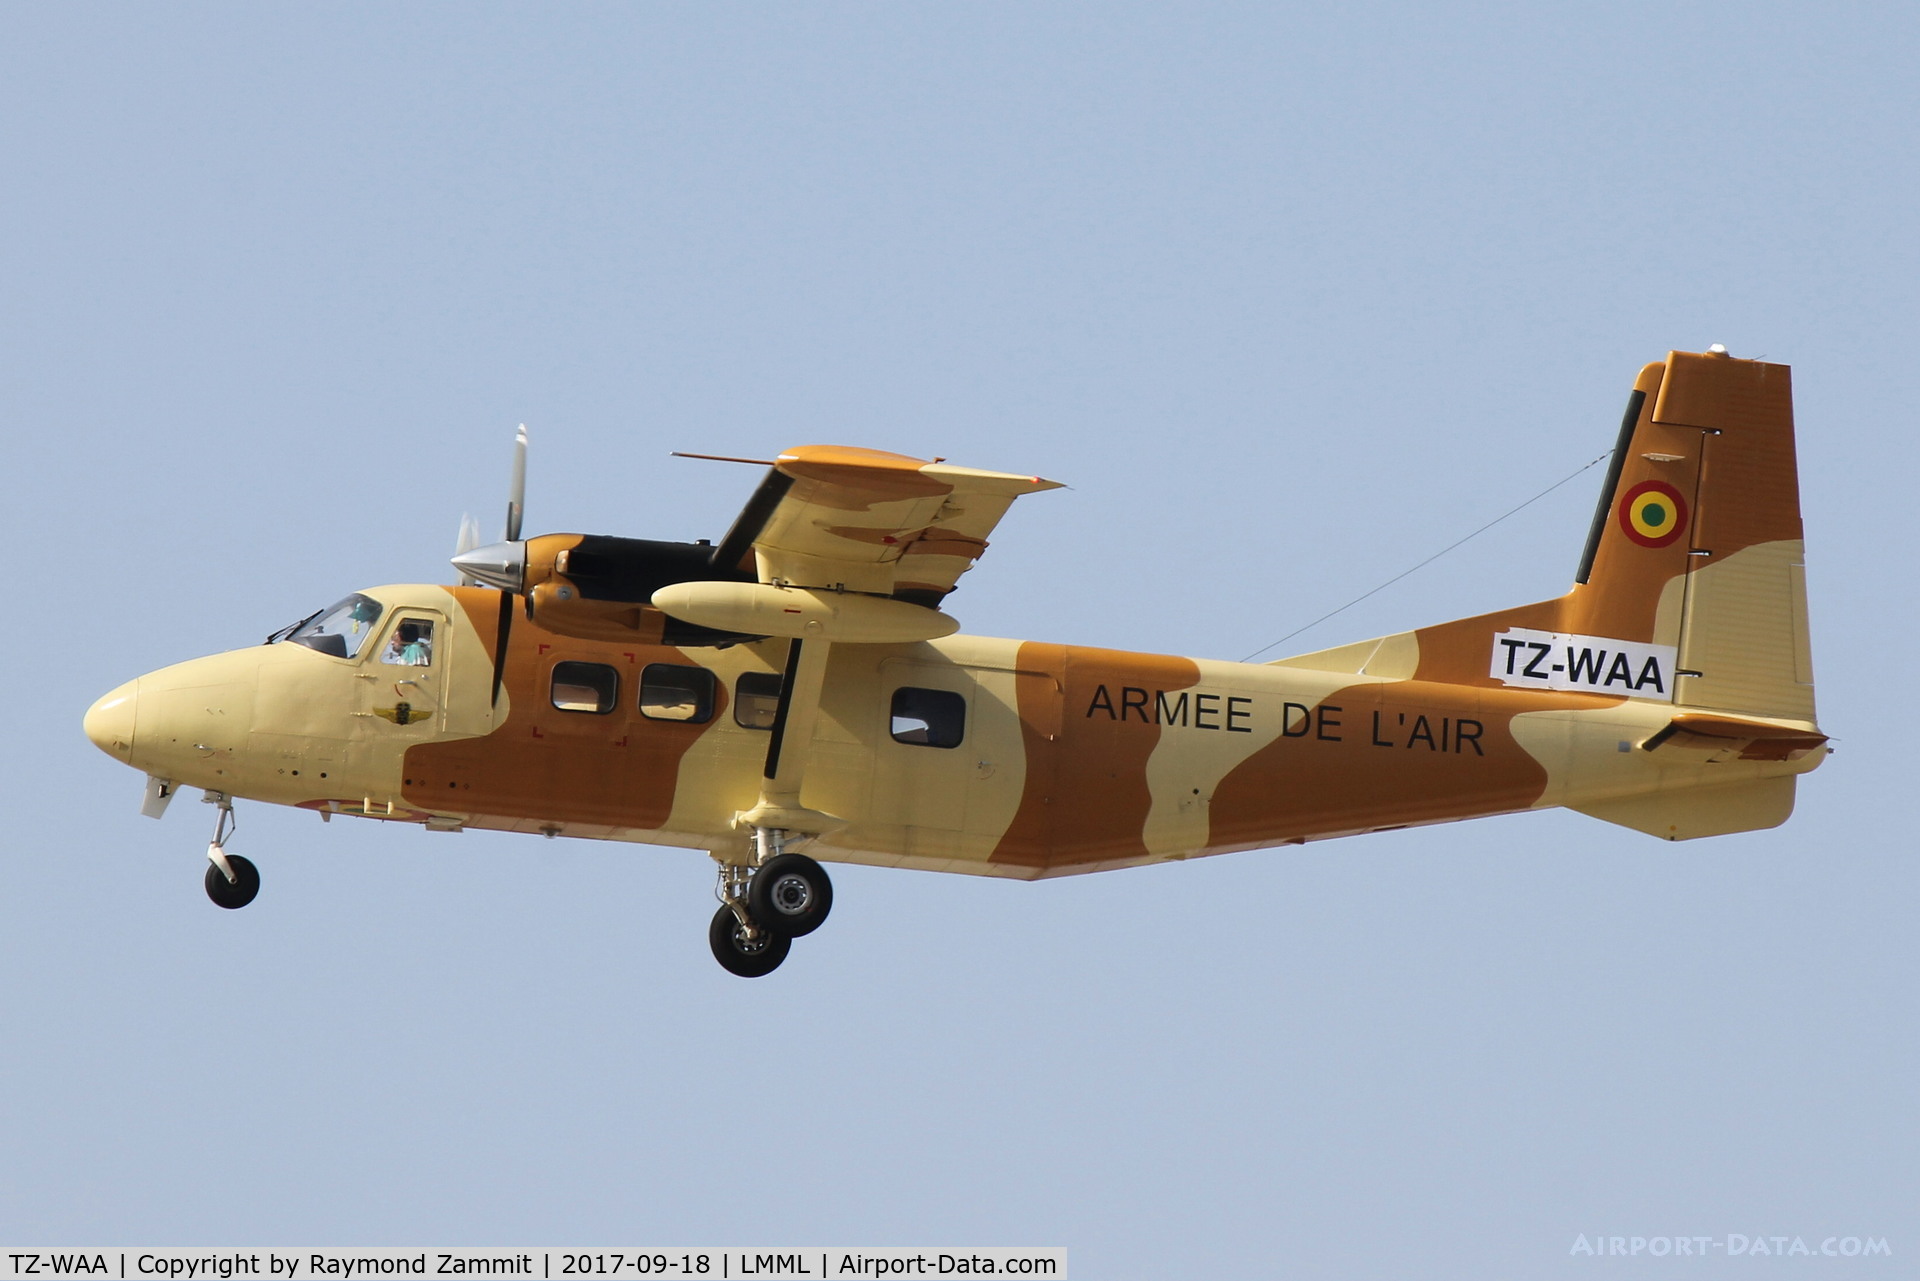 TZ-WAA, Harbin Y-12E C/N 093, Harbin Y-12E TZ-WAA taking off from Malta on delivery to the Mali Air Force